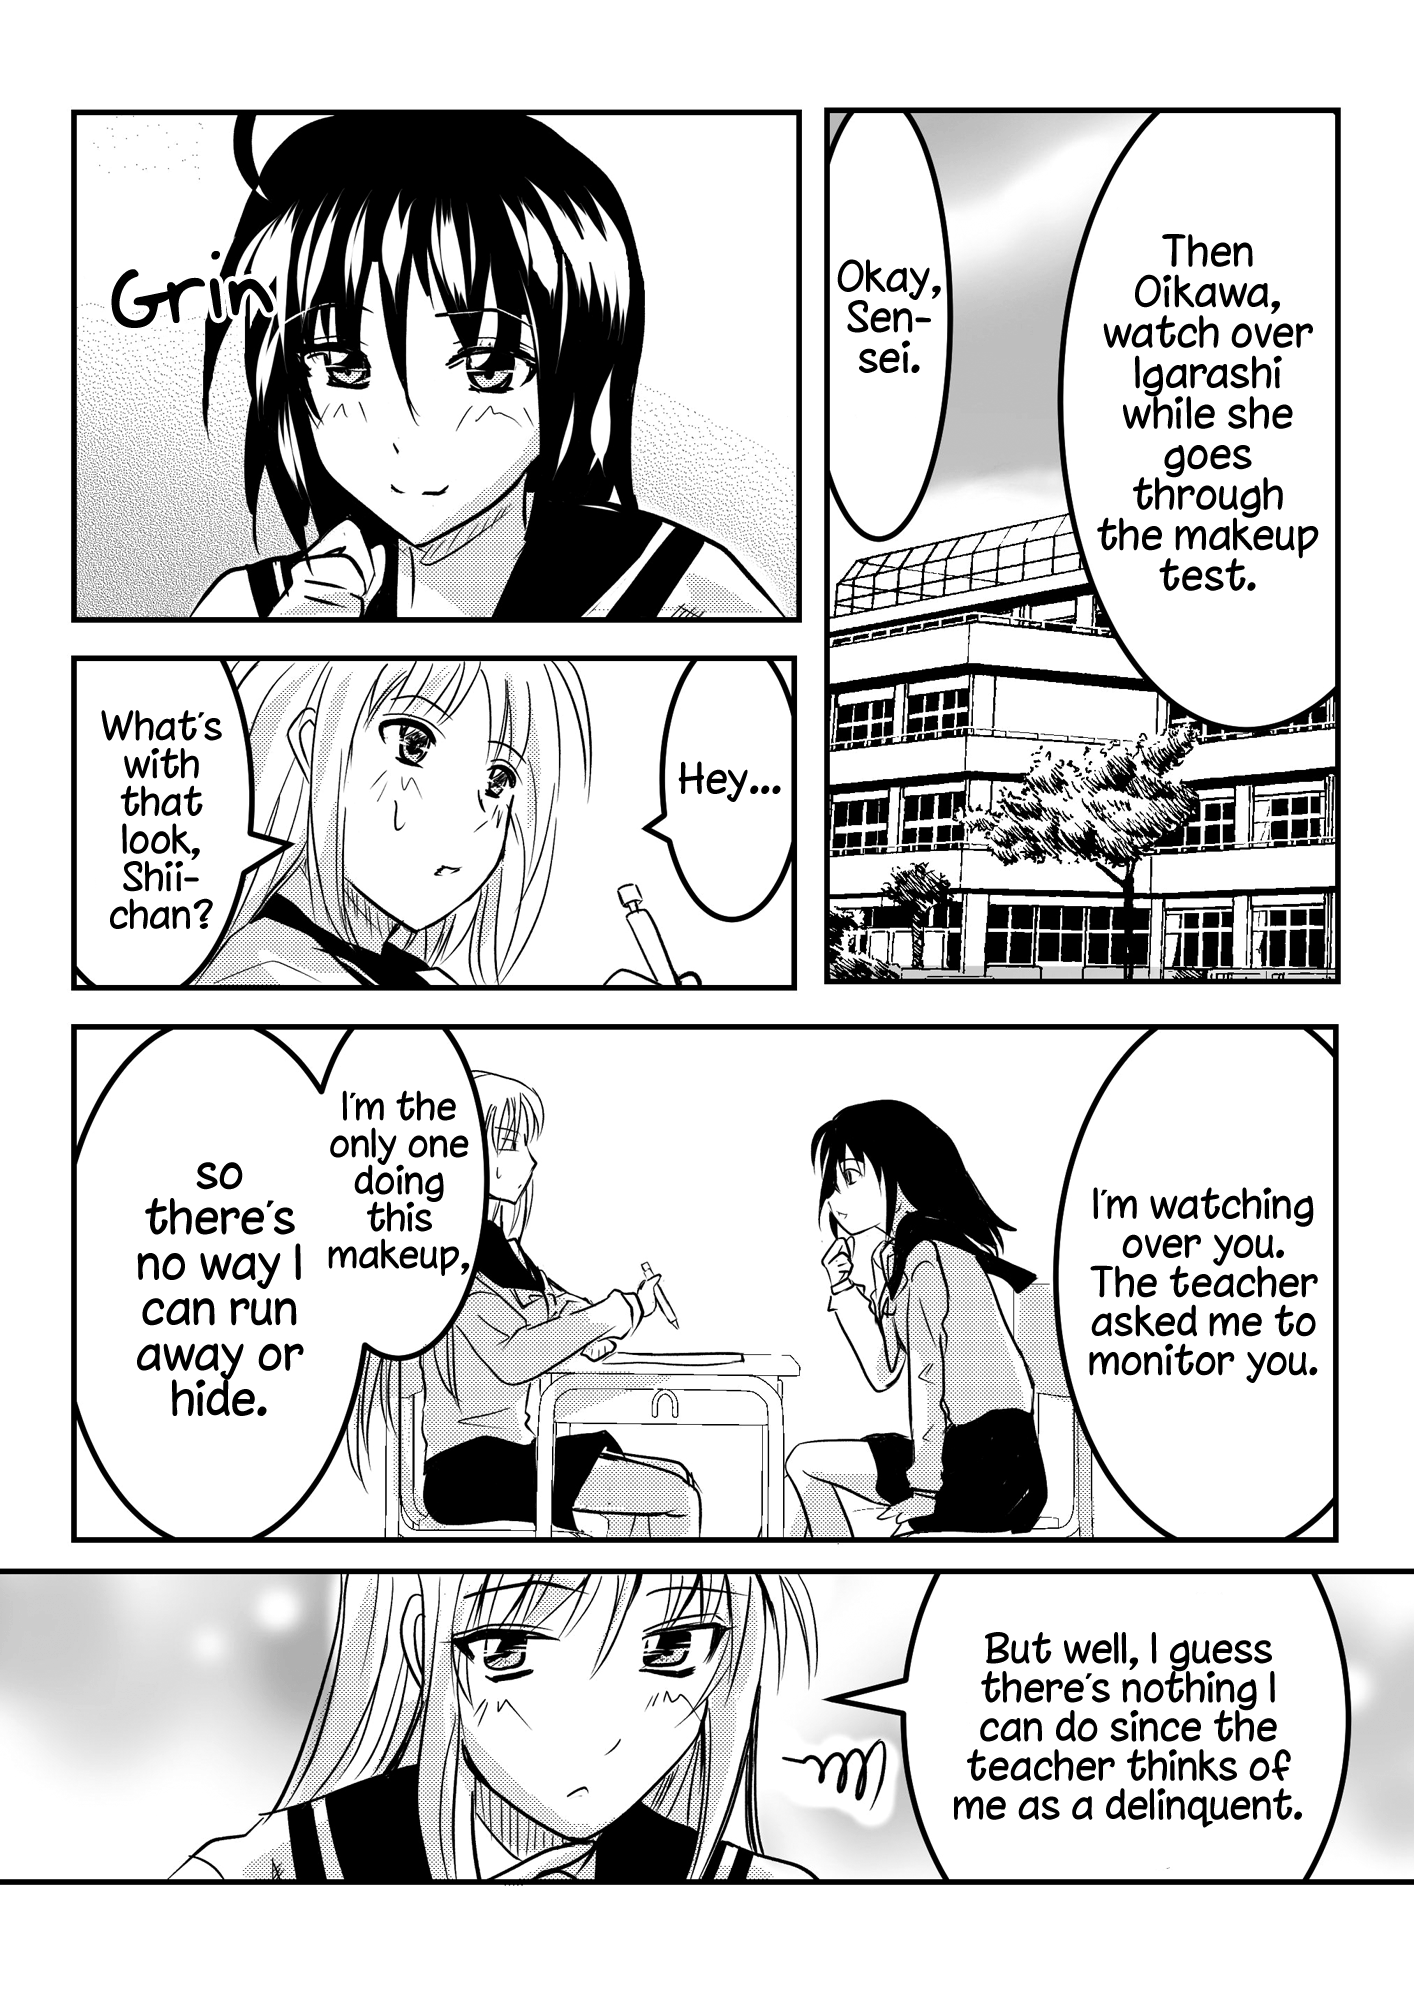 Delinquent Girl And Class Rep - Page 1